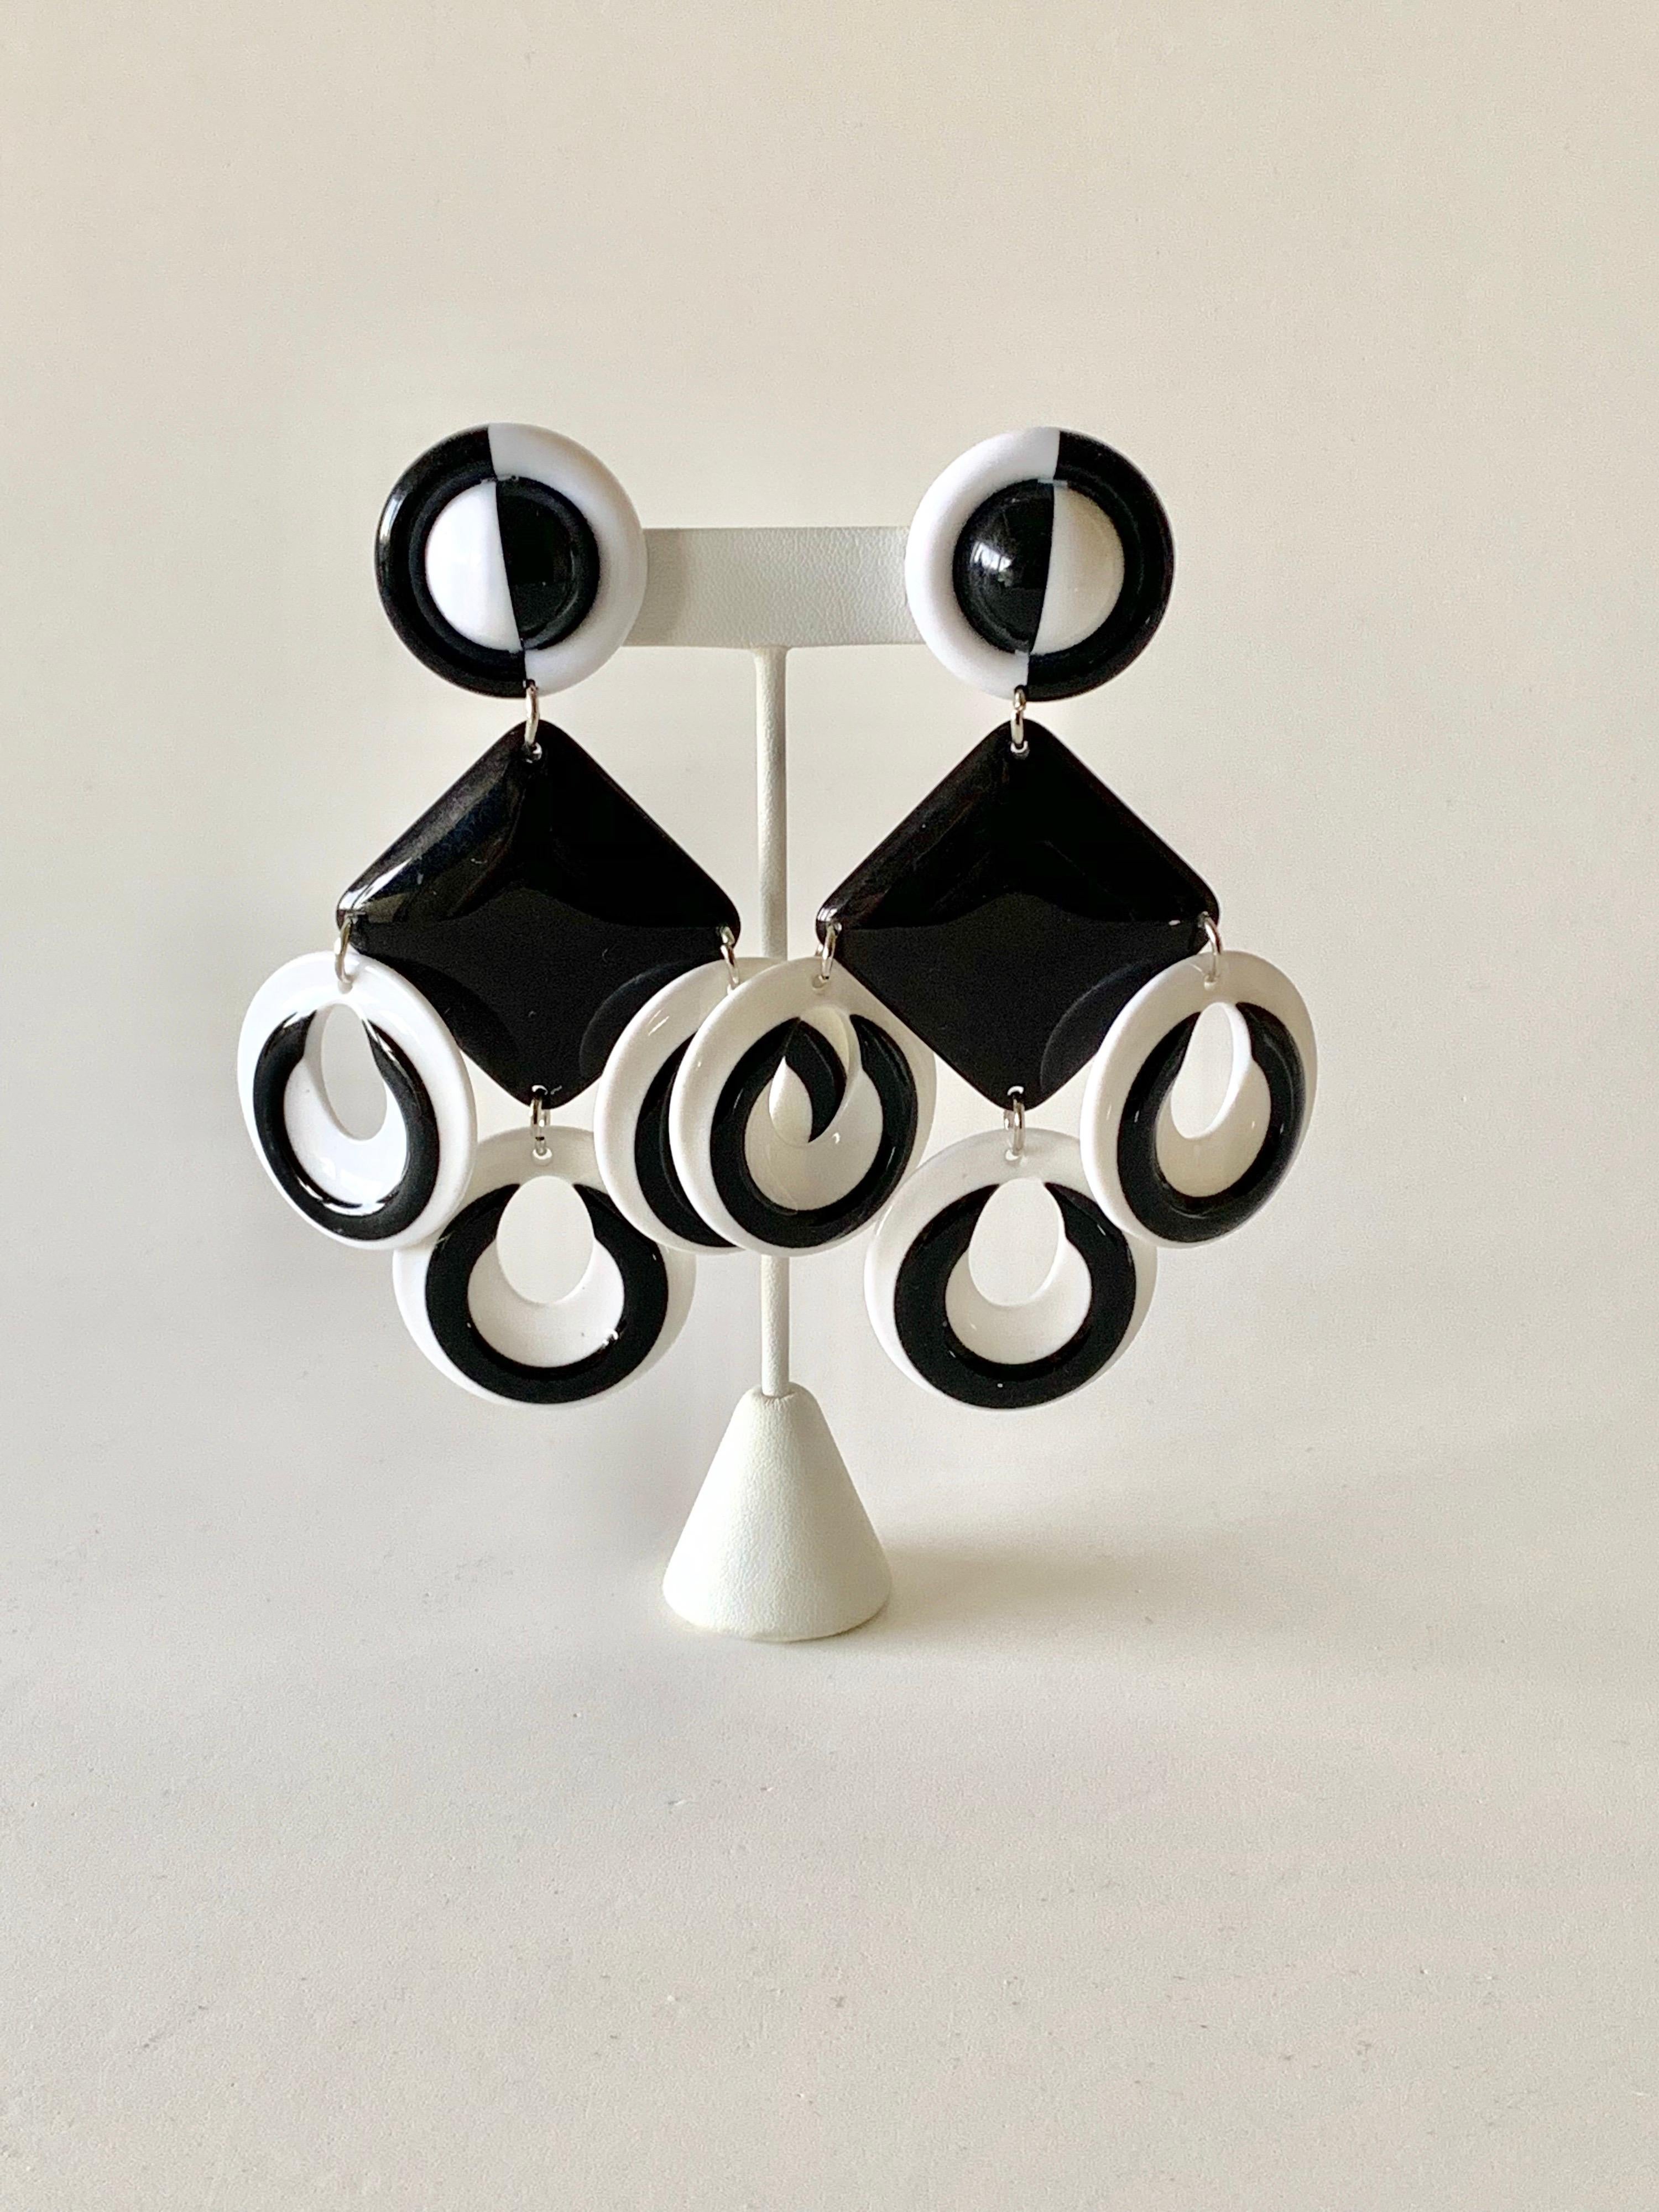 Contemporary Vintage Black and White Architectural Statement Earrings 